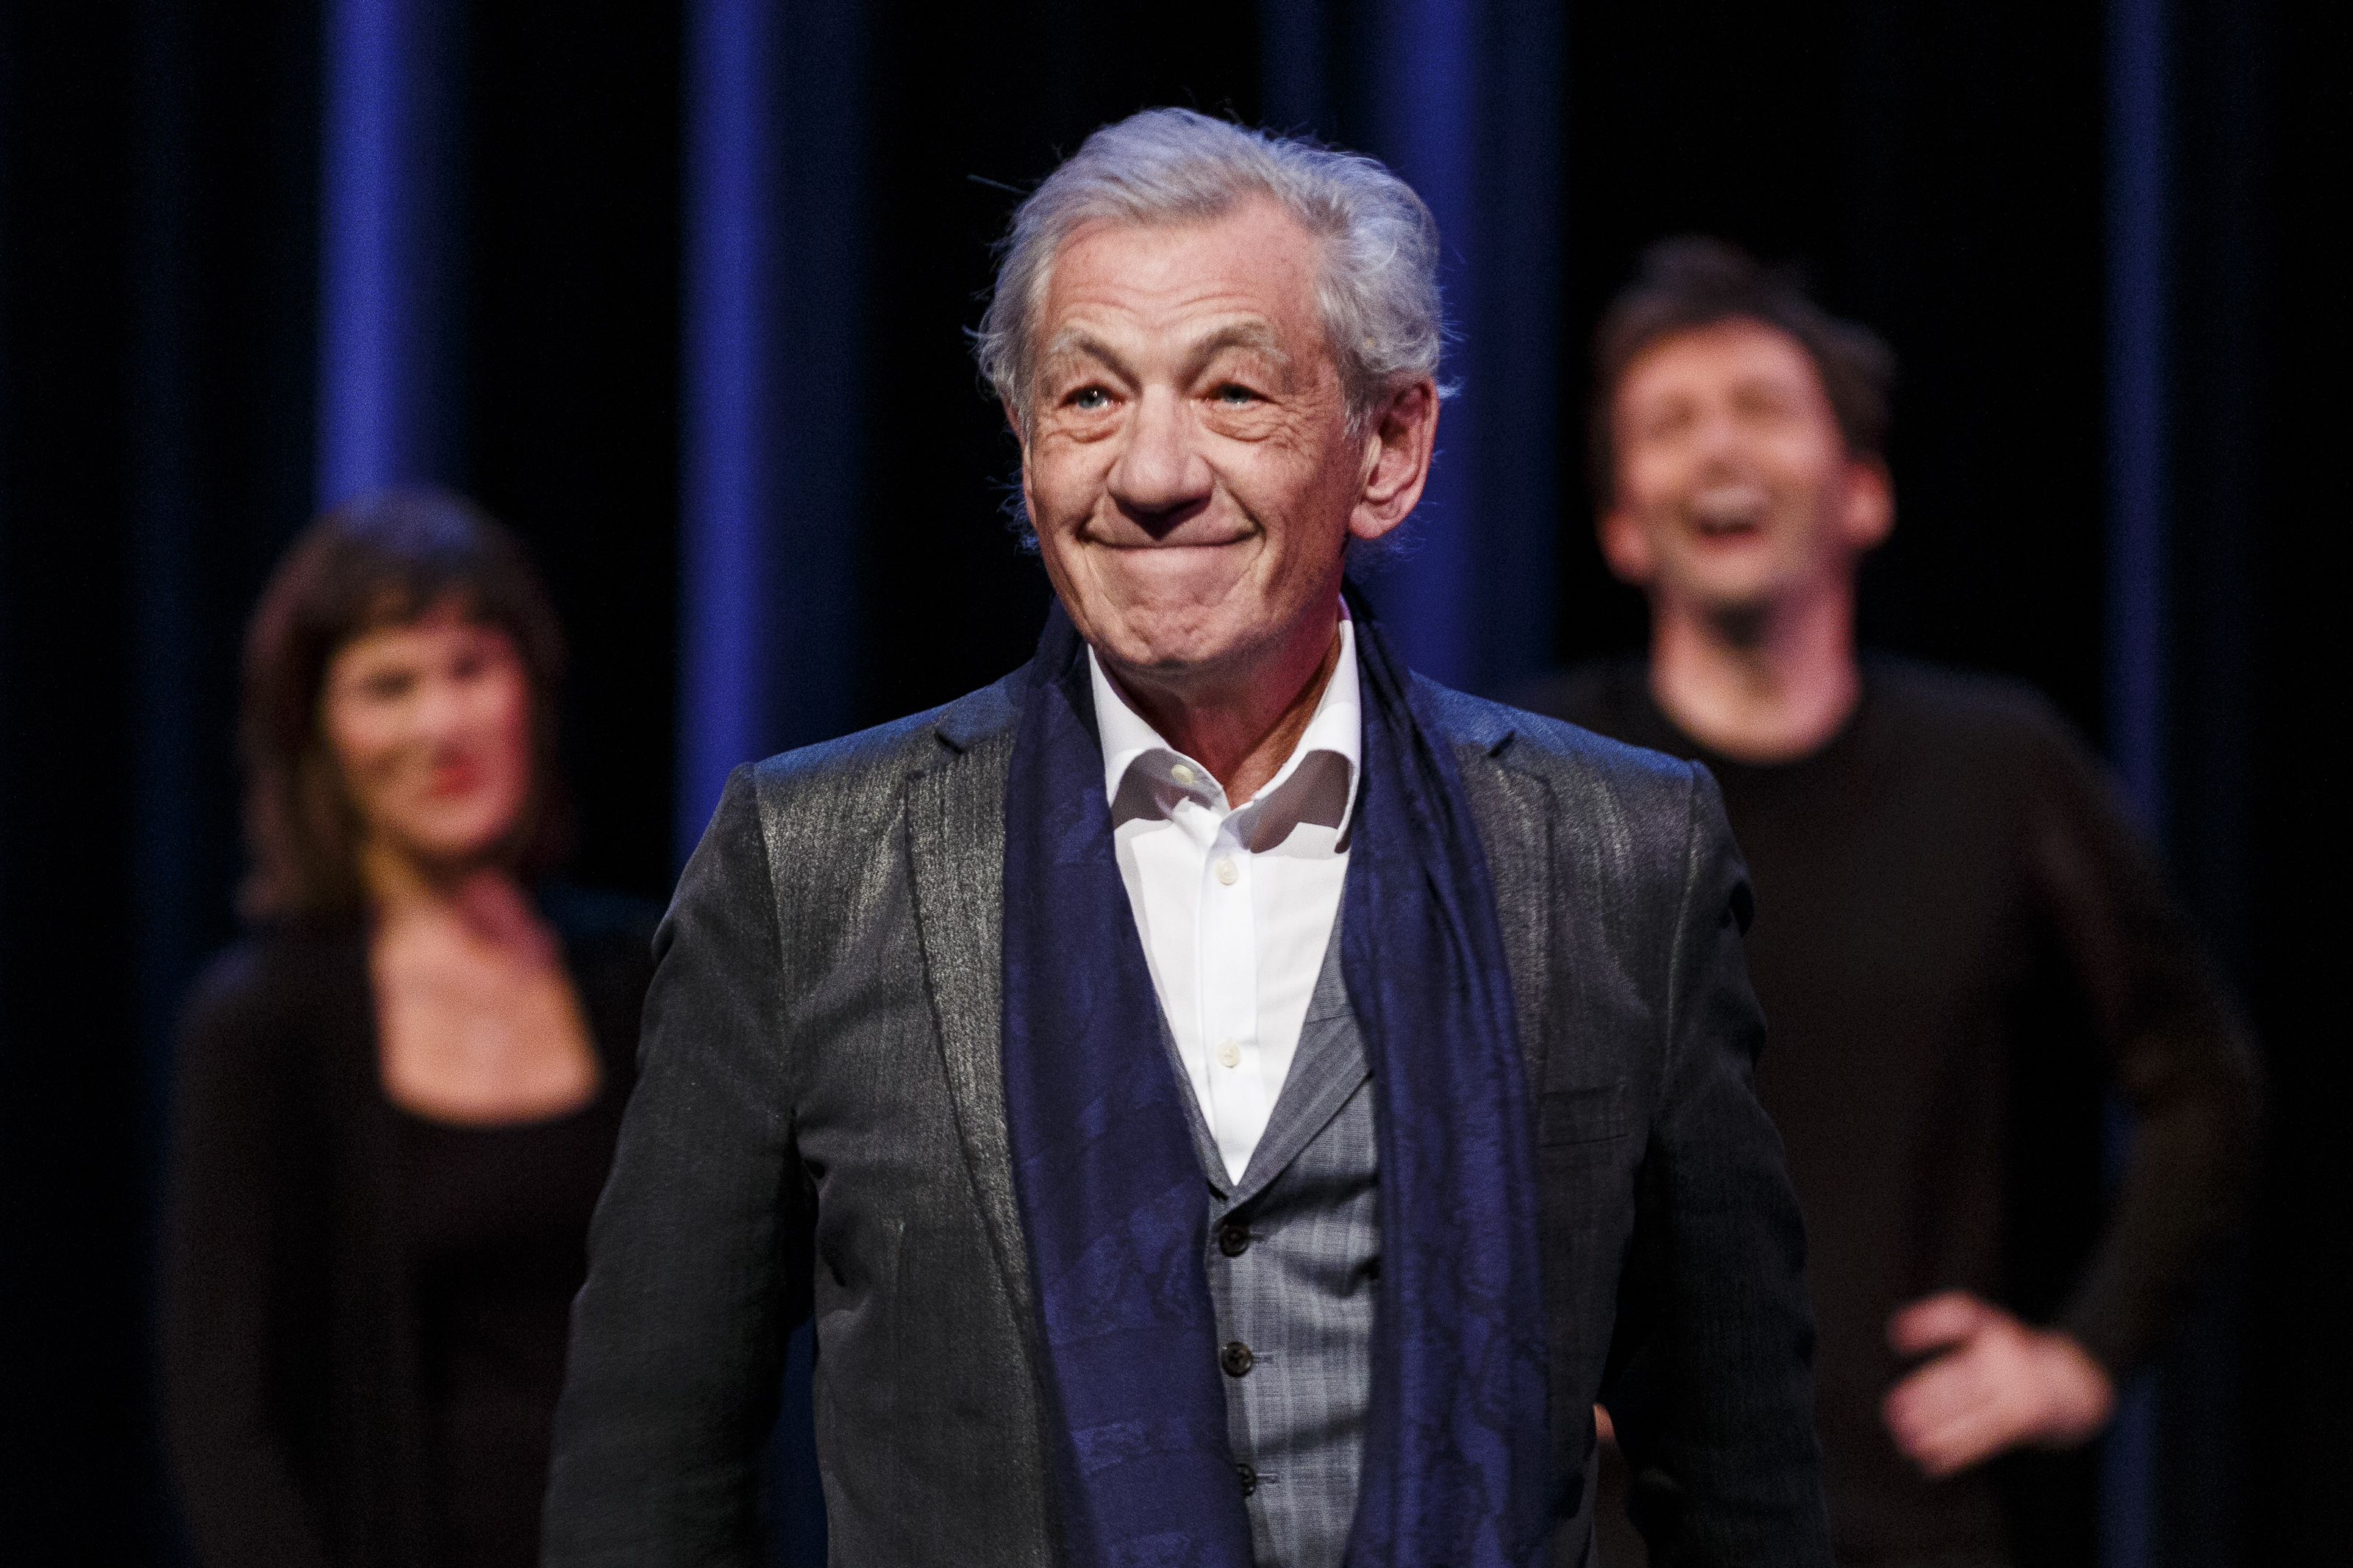 Ian McKellen releases journal entries he wrote during 'Lord of the Rings'  shoot - Times of India